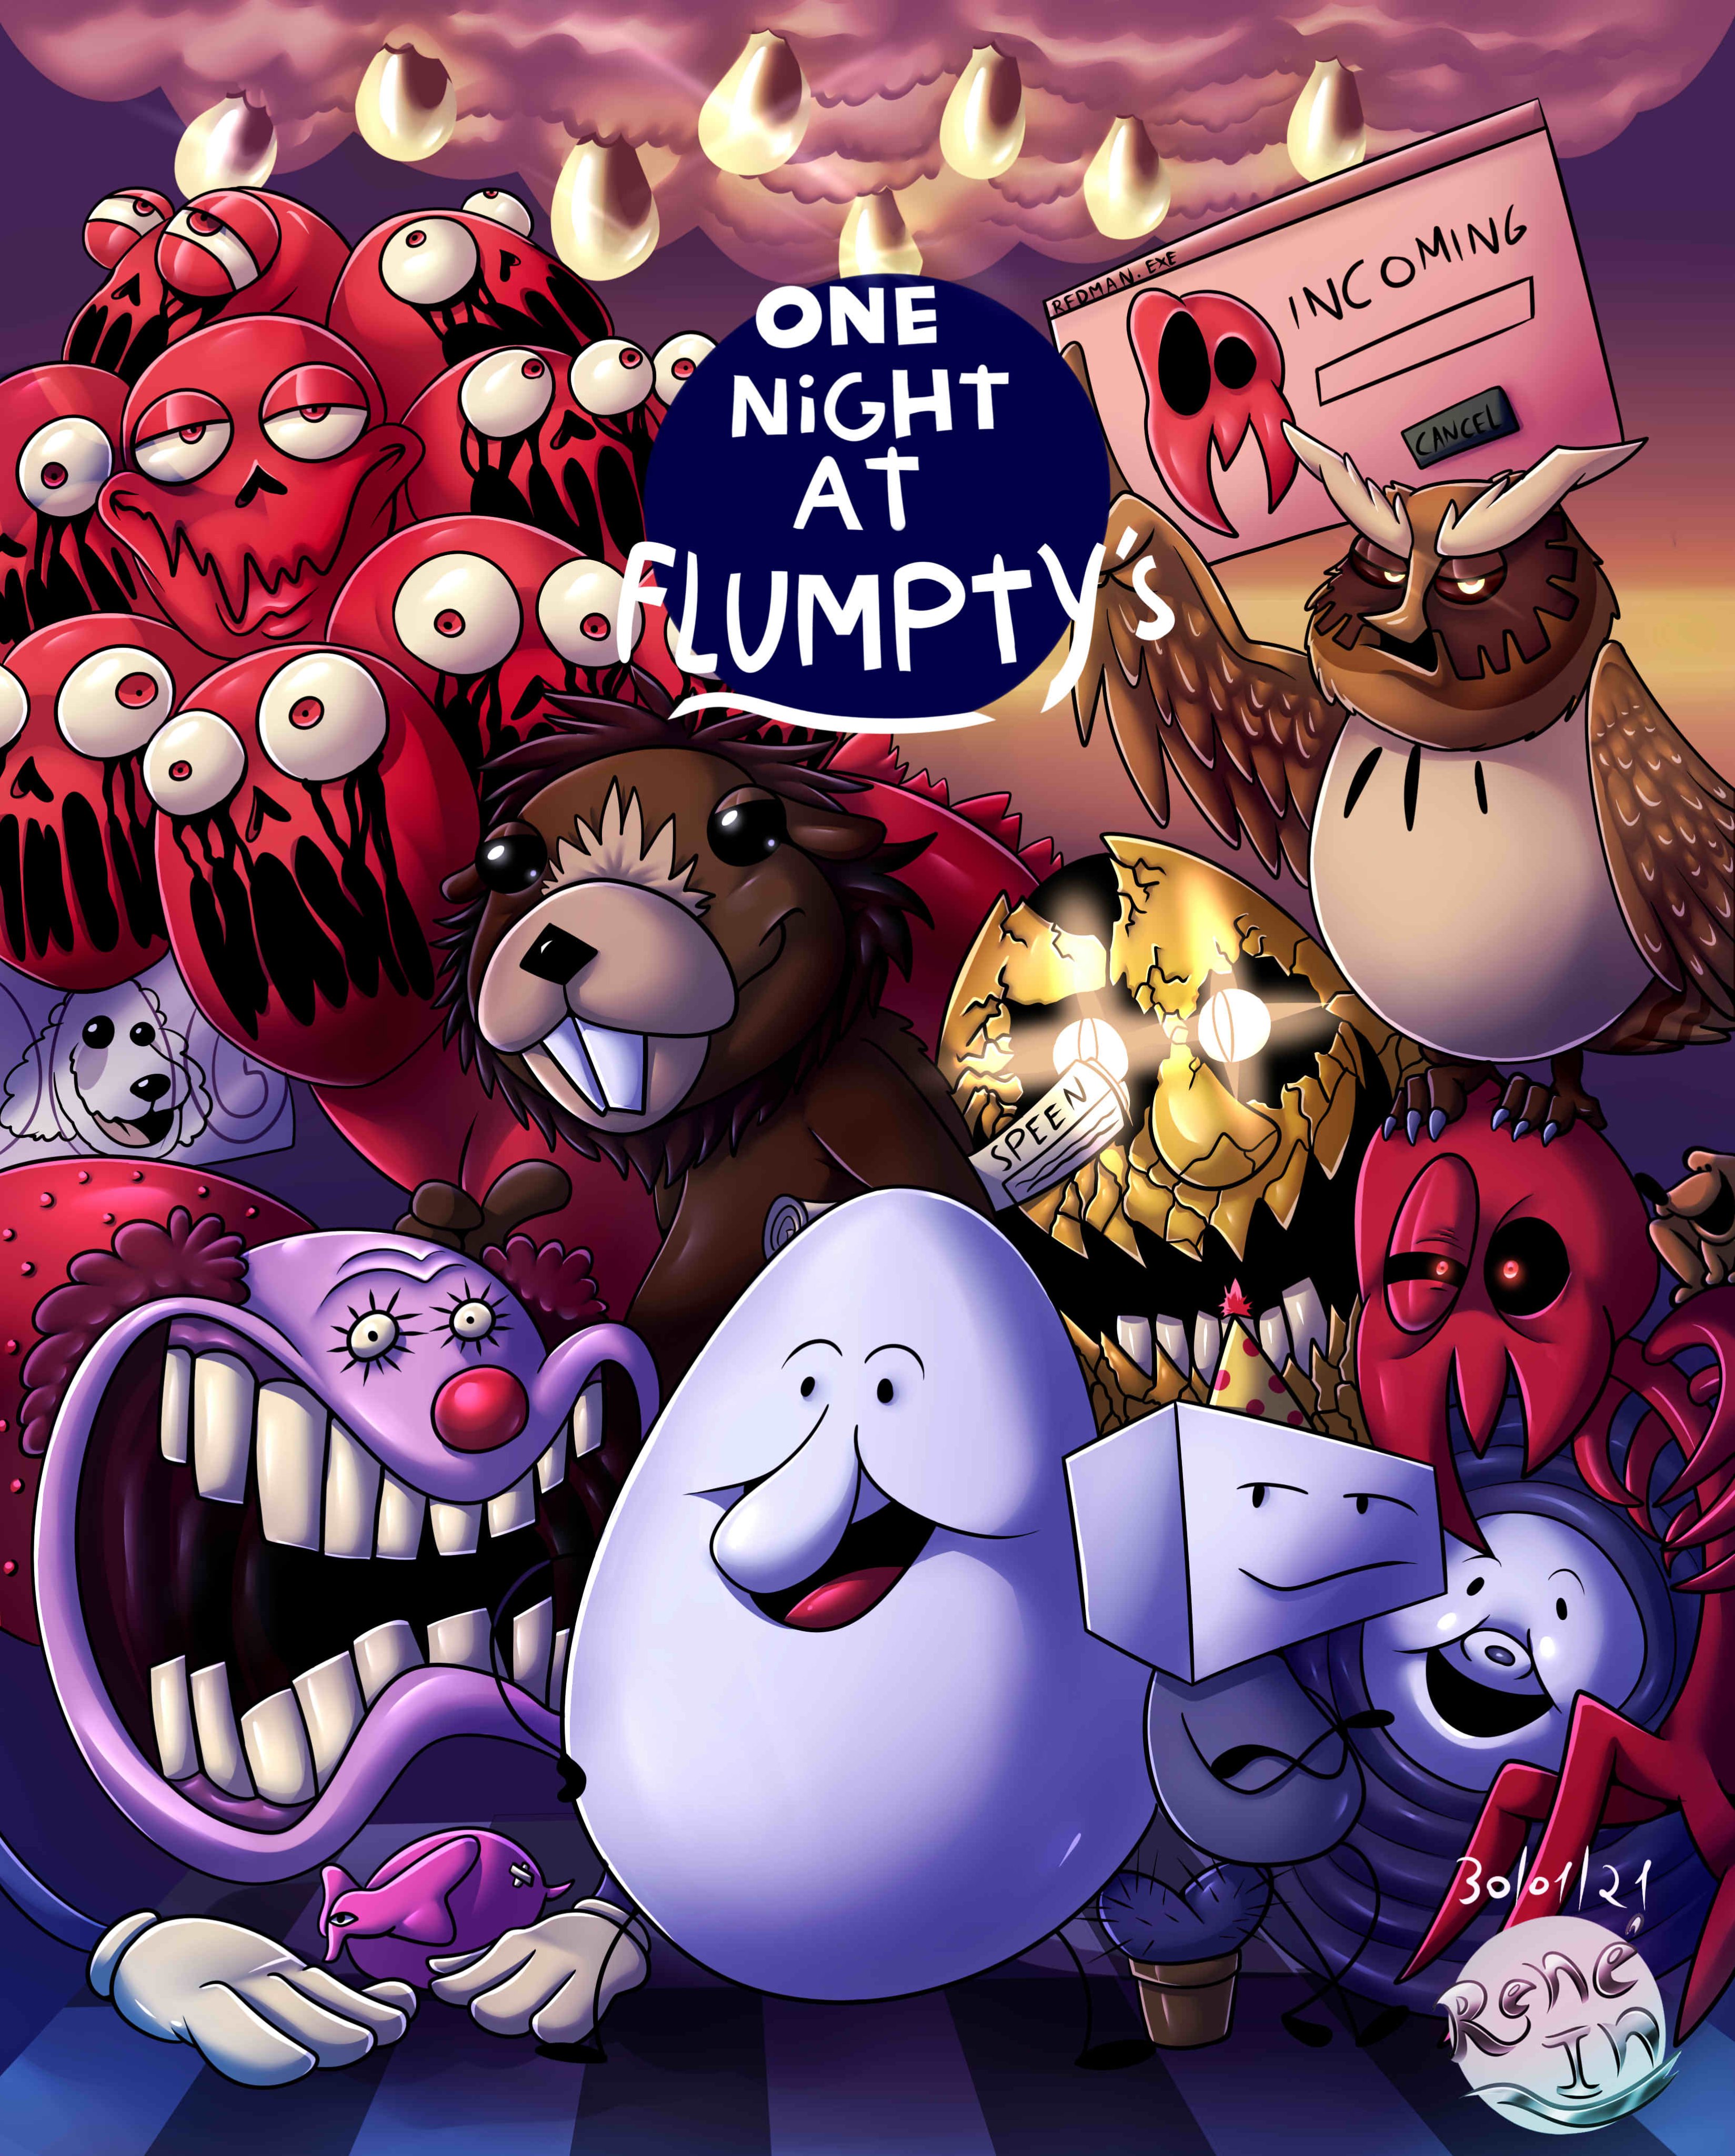 one night at flumpty's, golden flumpty by xiwkyeh on DeviantArt